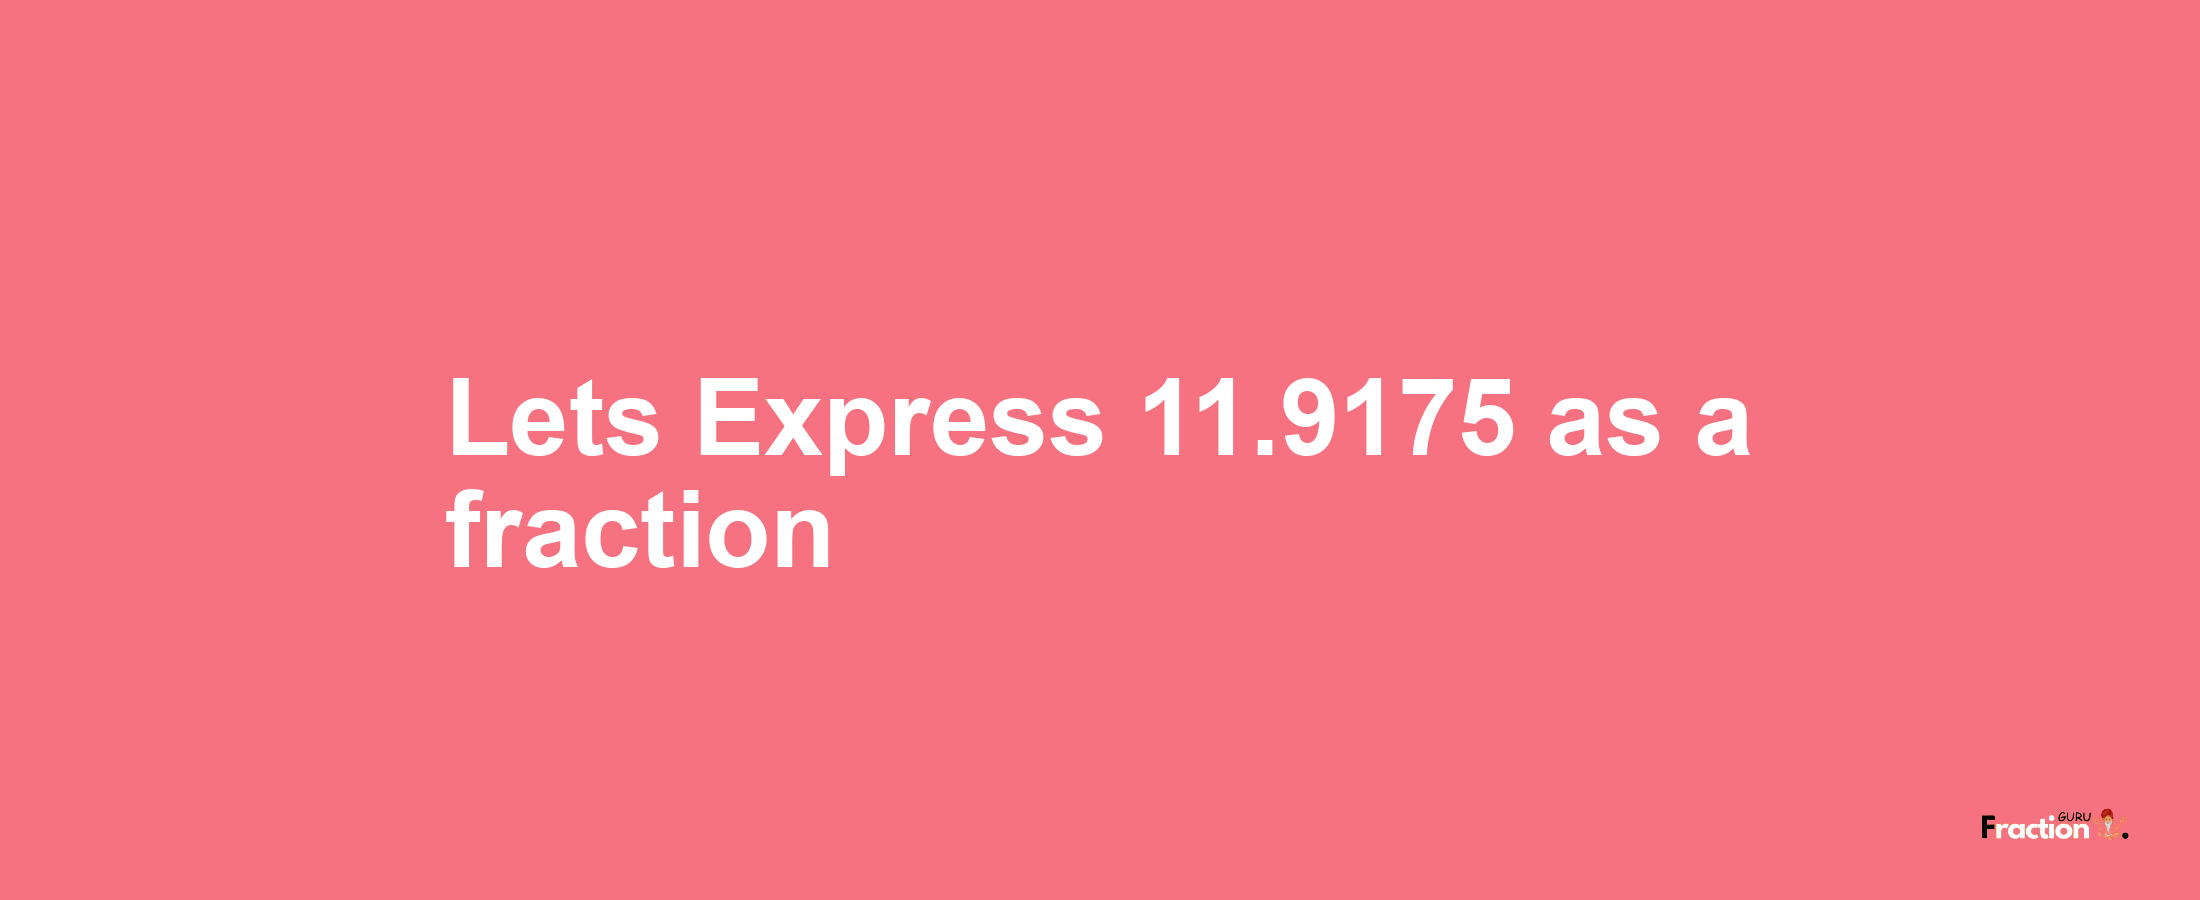 Lets Express 11.9175 as afraction